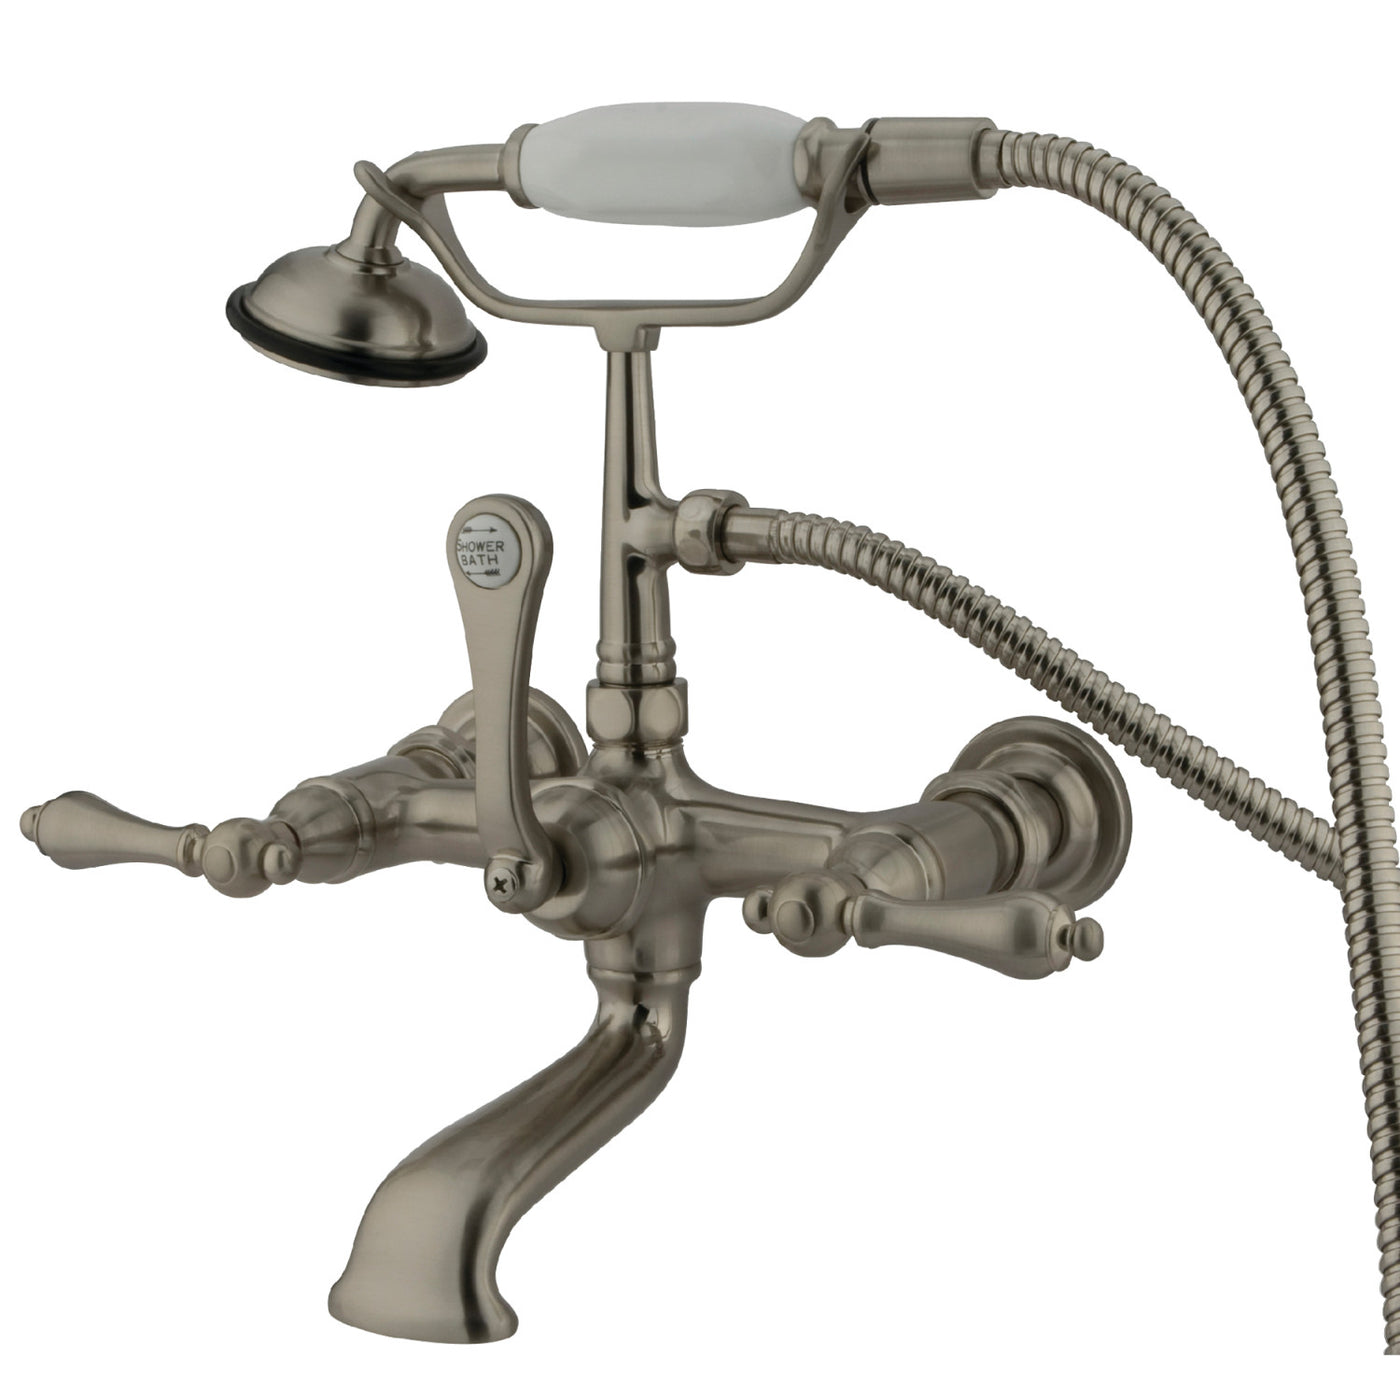 Elements of Design DT5518AL 7-Inch Wall Mount Tub Faucet with Hand Shower, Brushed Nickel